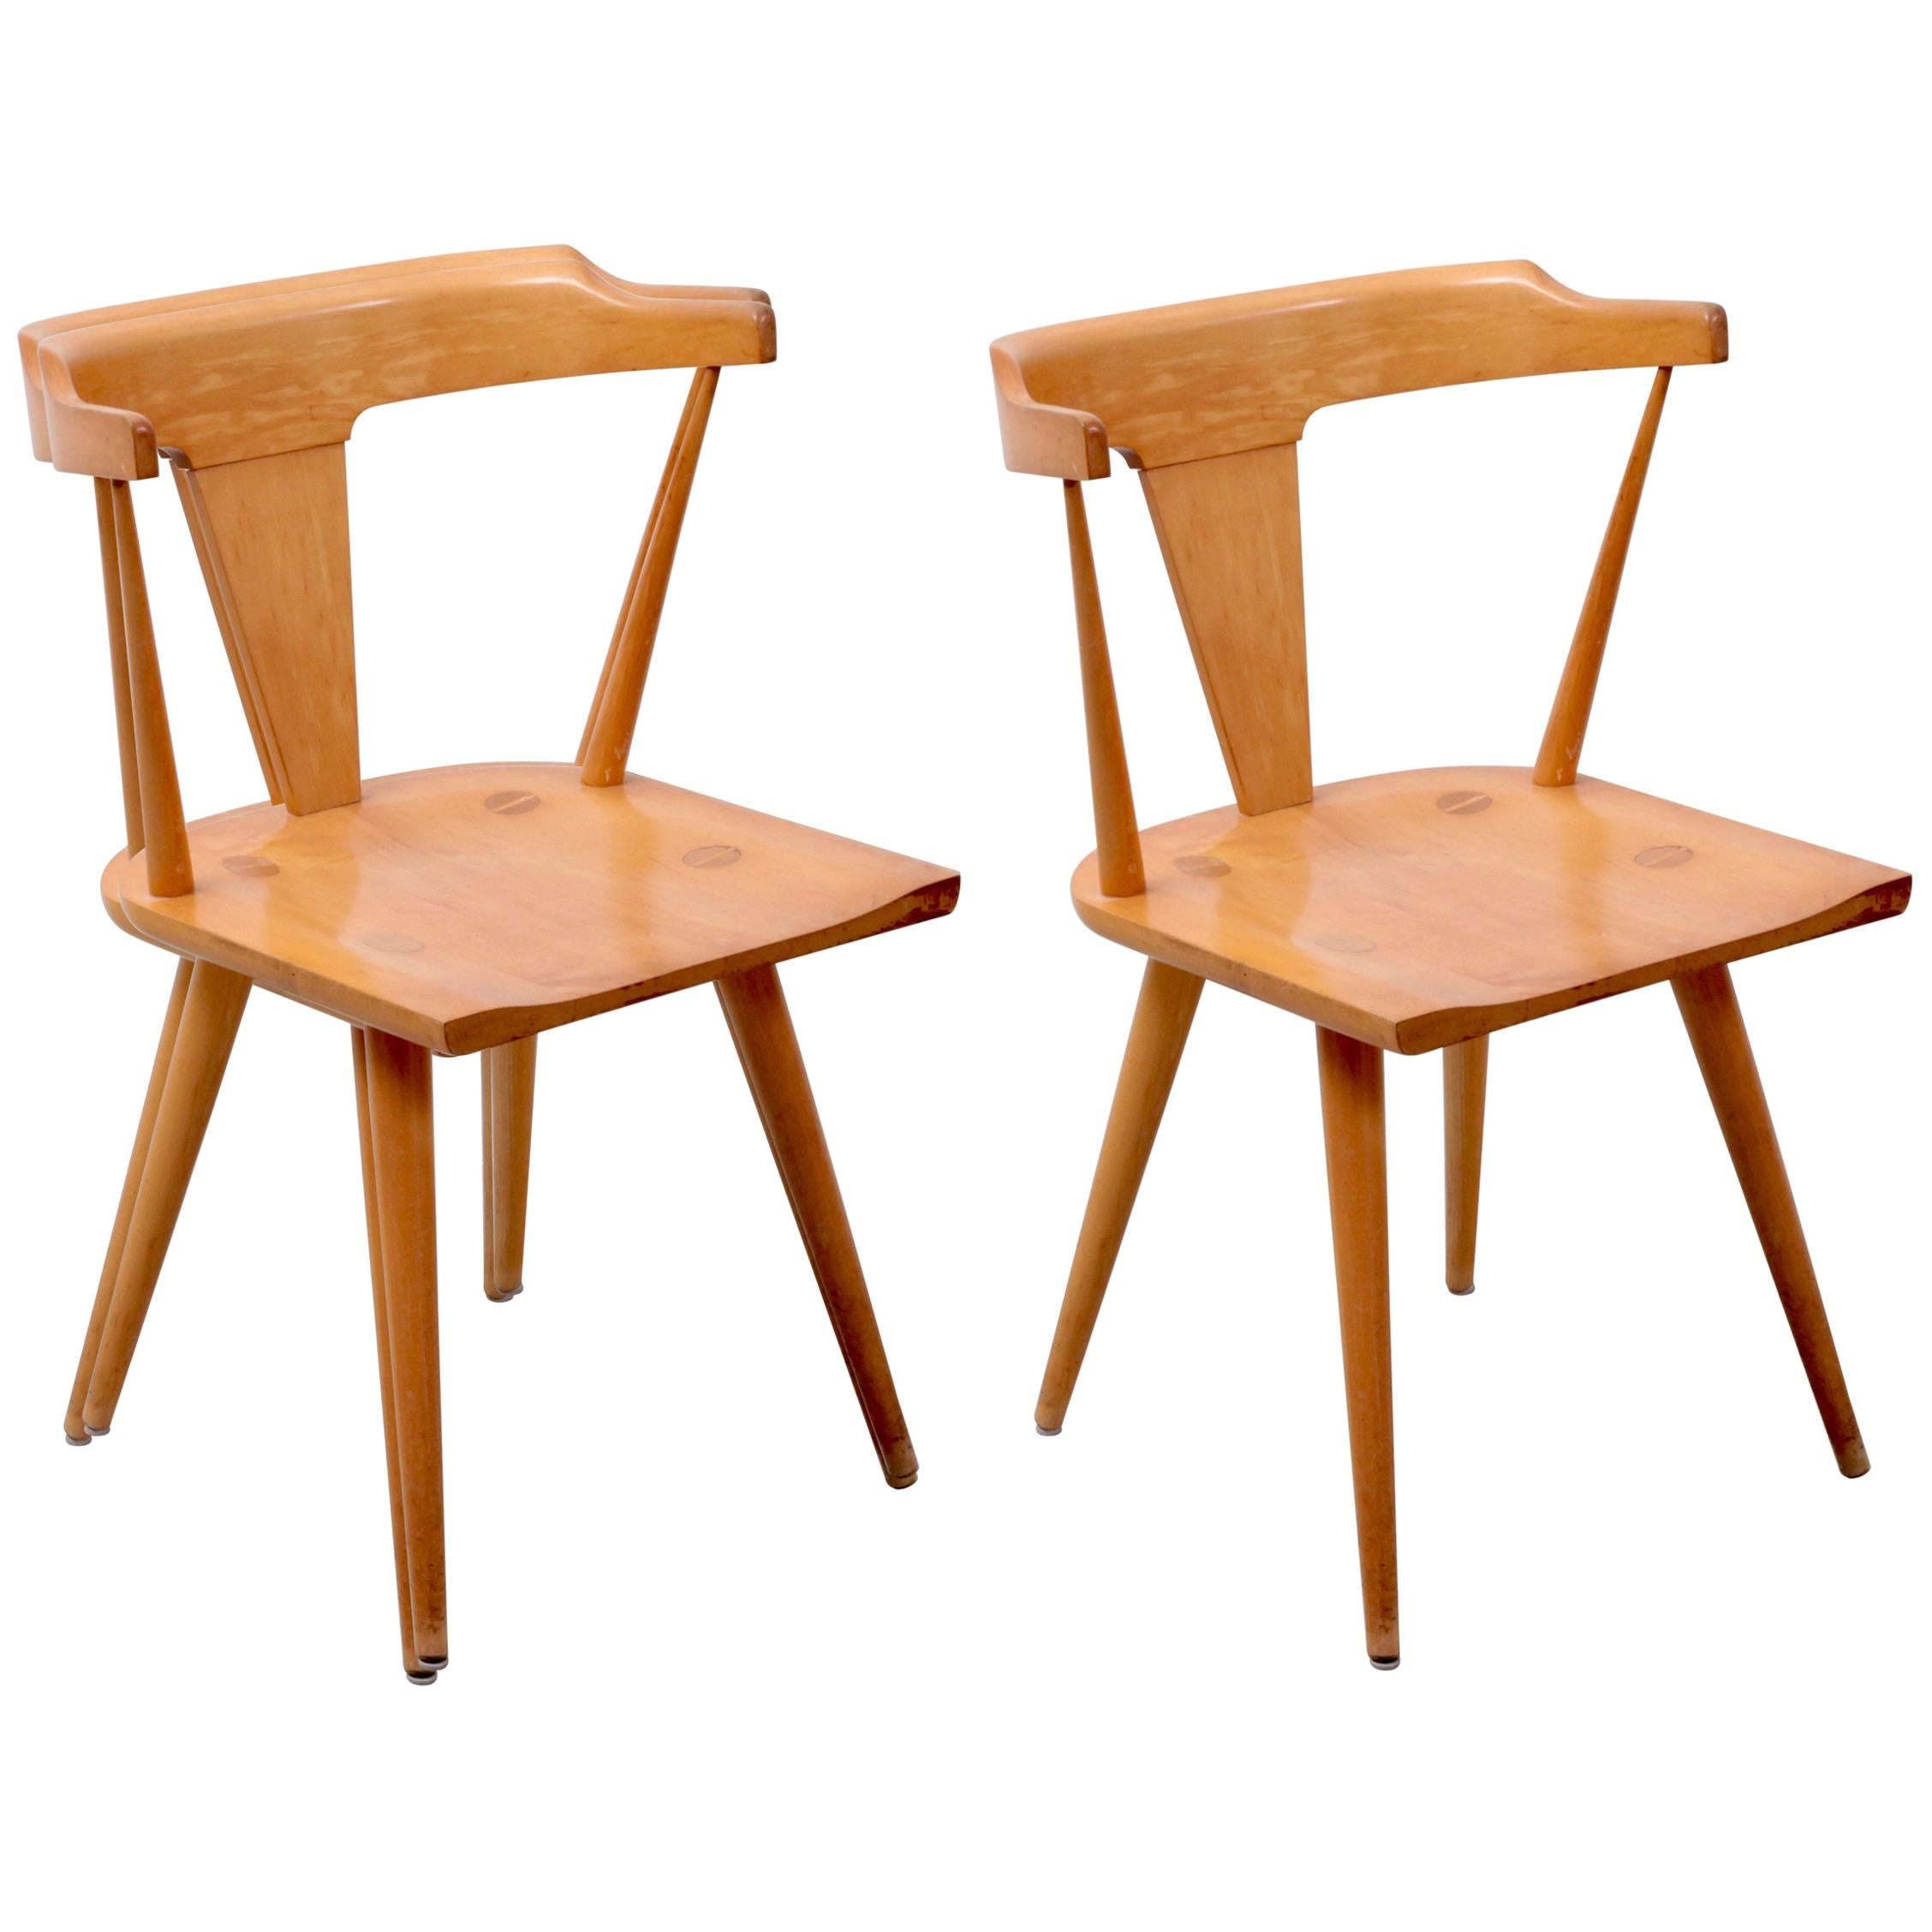 Pair of Planner Group T-Back Chairs by Paul McCobb for Winchendon